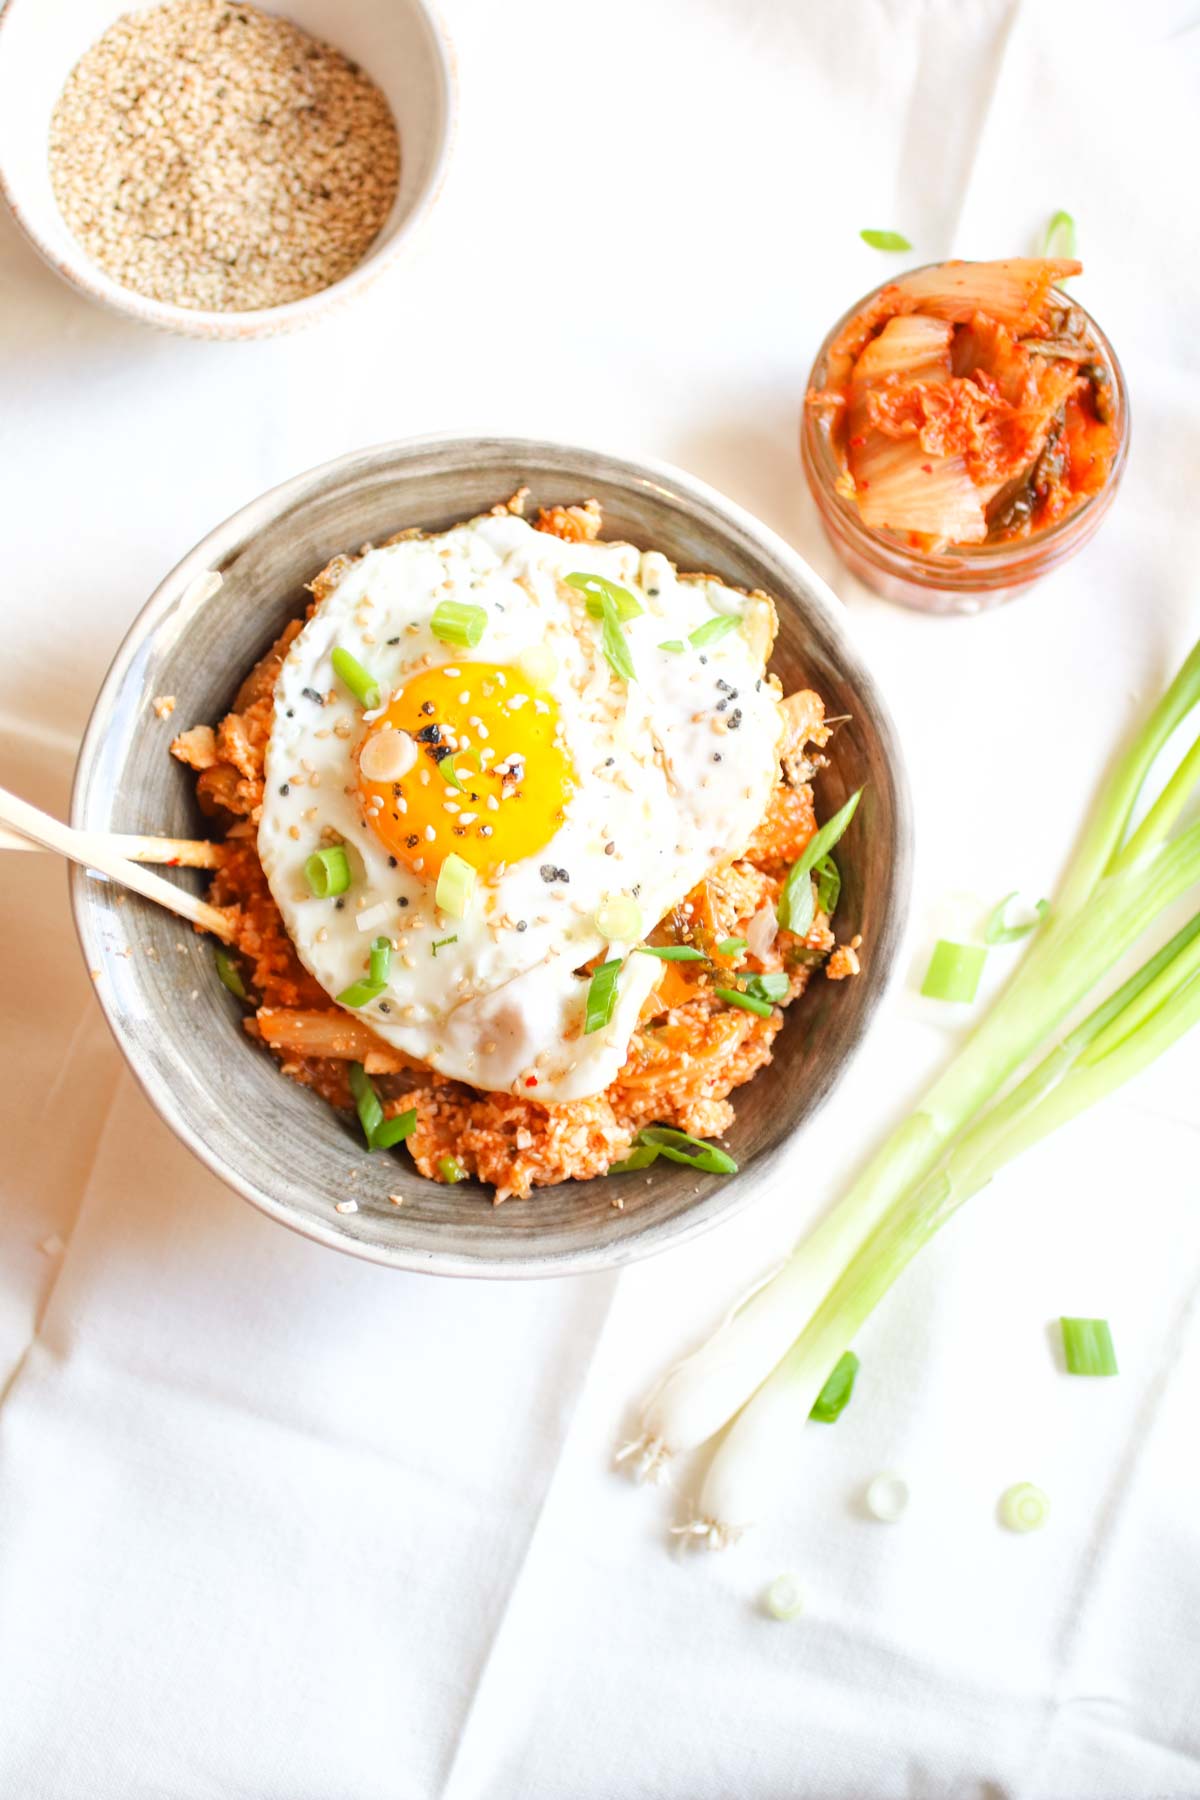 Spicy Kimchi Cauliflower Fried Rice with a Perfect Egg on Top. Grain free, gluten free, paleo, whole30, crazy delicious and done in 15 minutes! abraskitchen.com